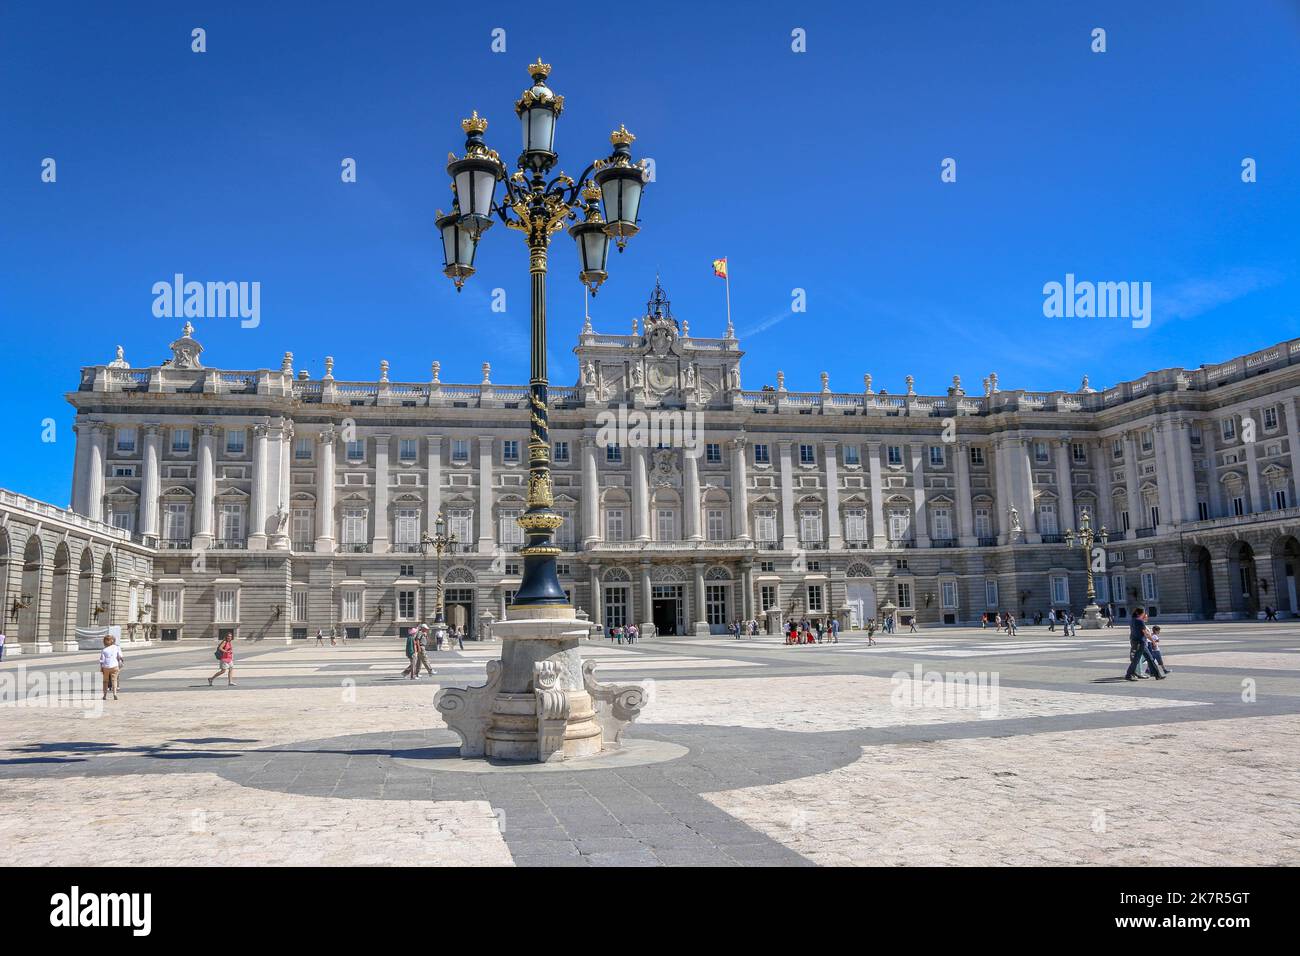 The Royal Palace in the city of Madrid, Spain Stock Photo